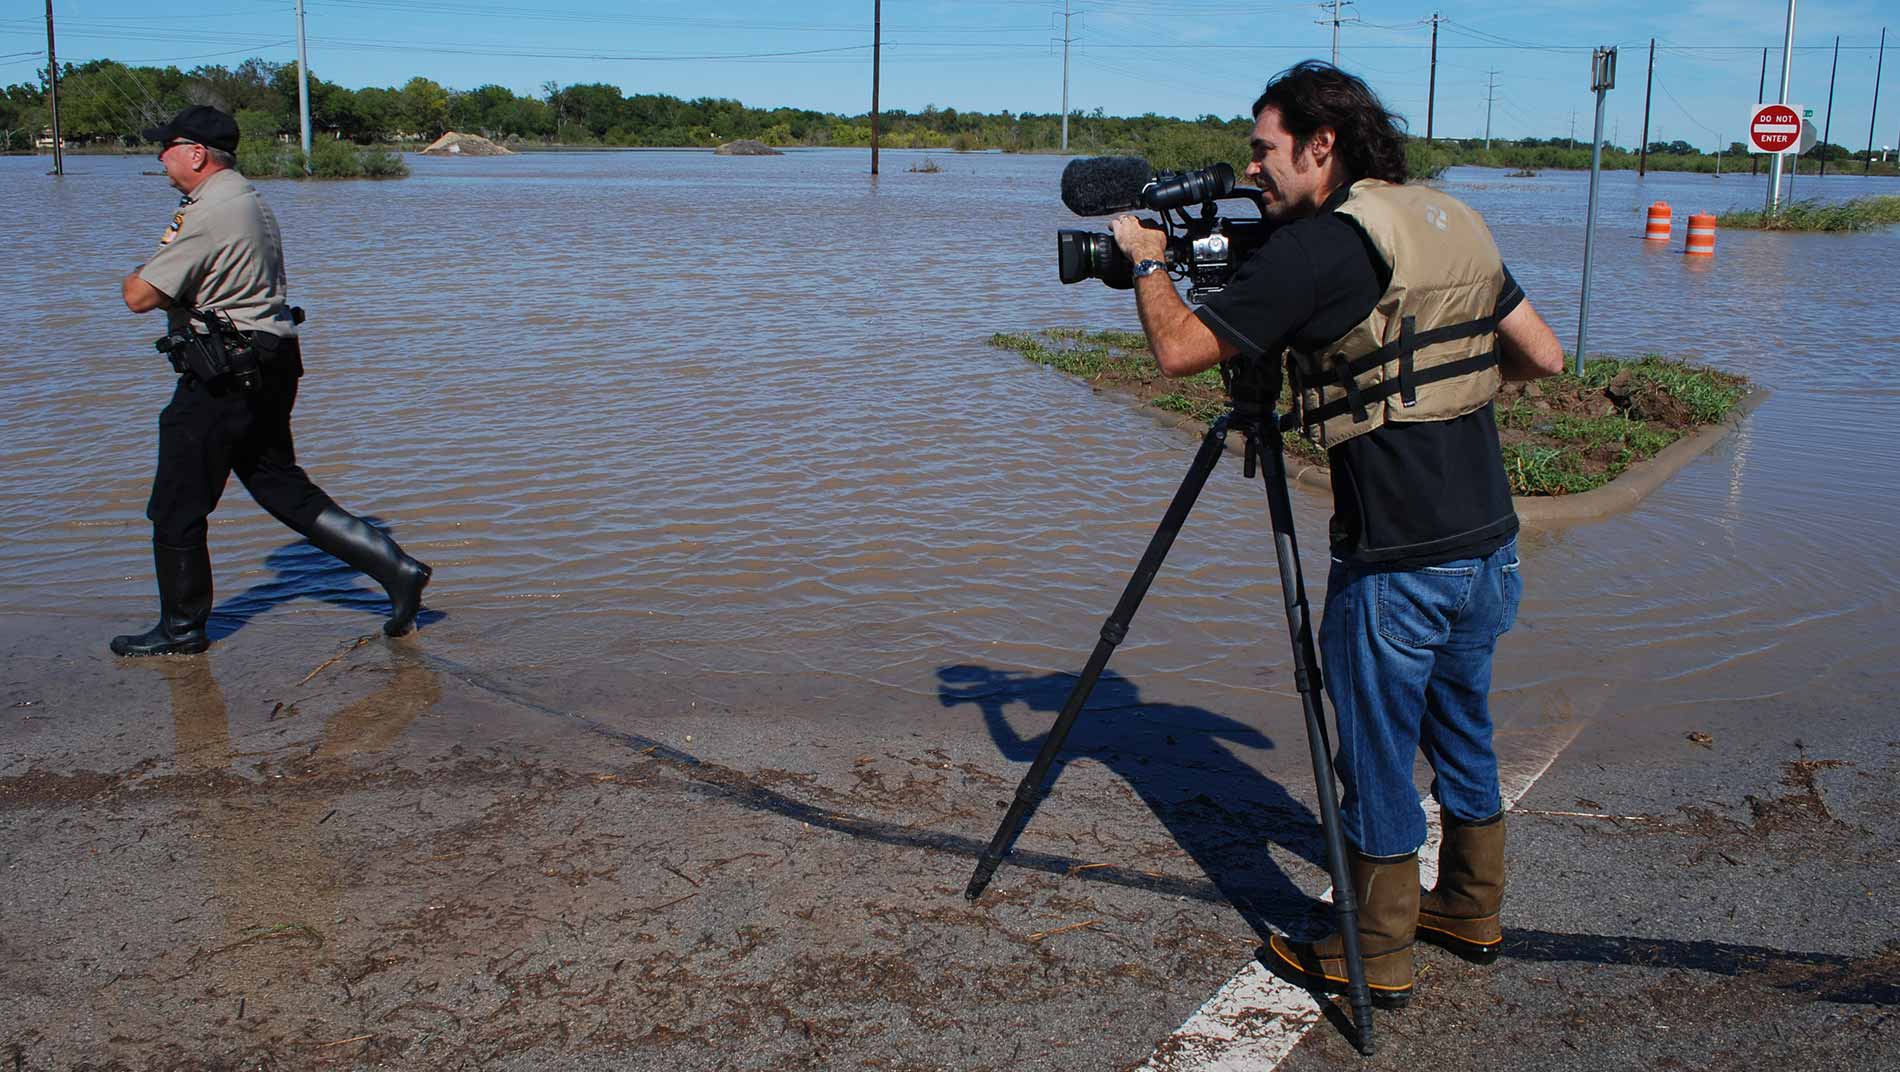 Producer Abe Moore covers Texas Game Wardens making water rescues during Austin flooding.